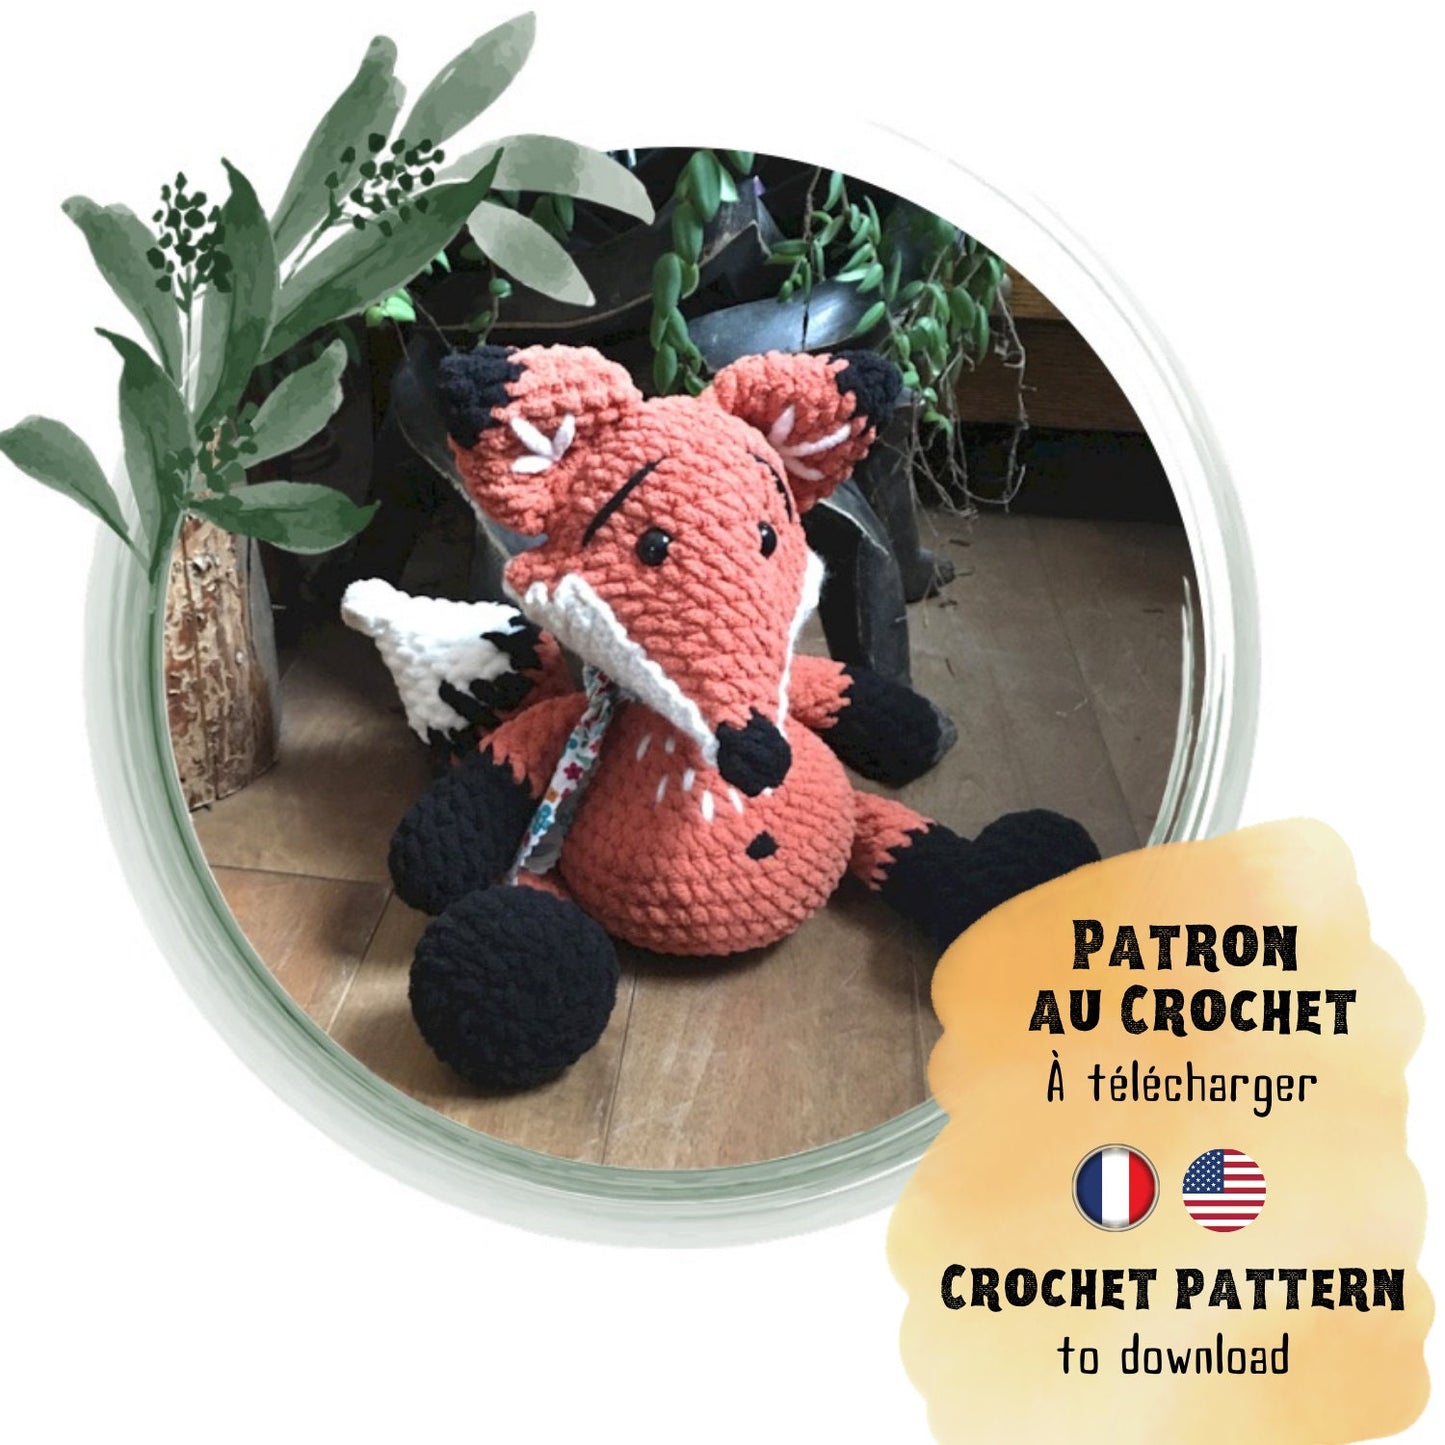 Michel Le Renard, crochet boss to download, French and English PDF